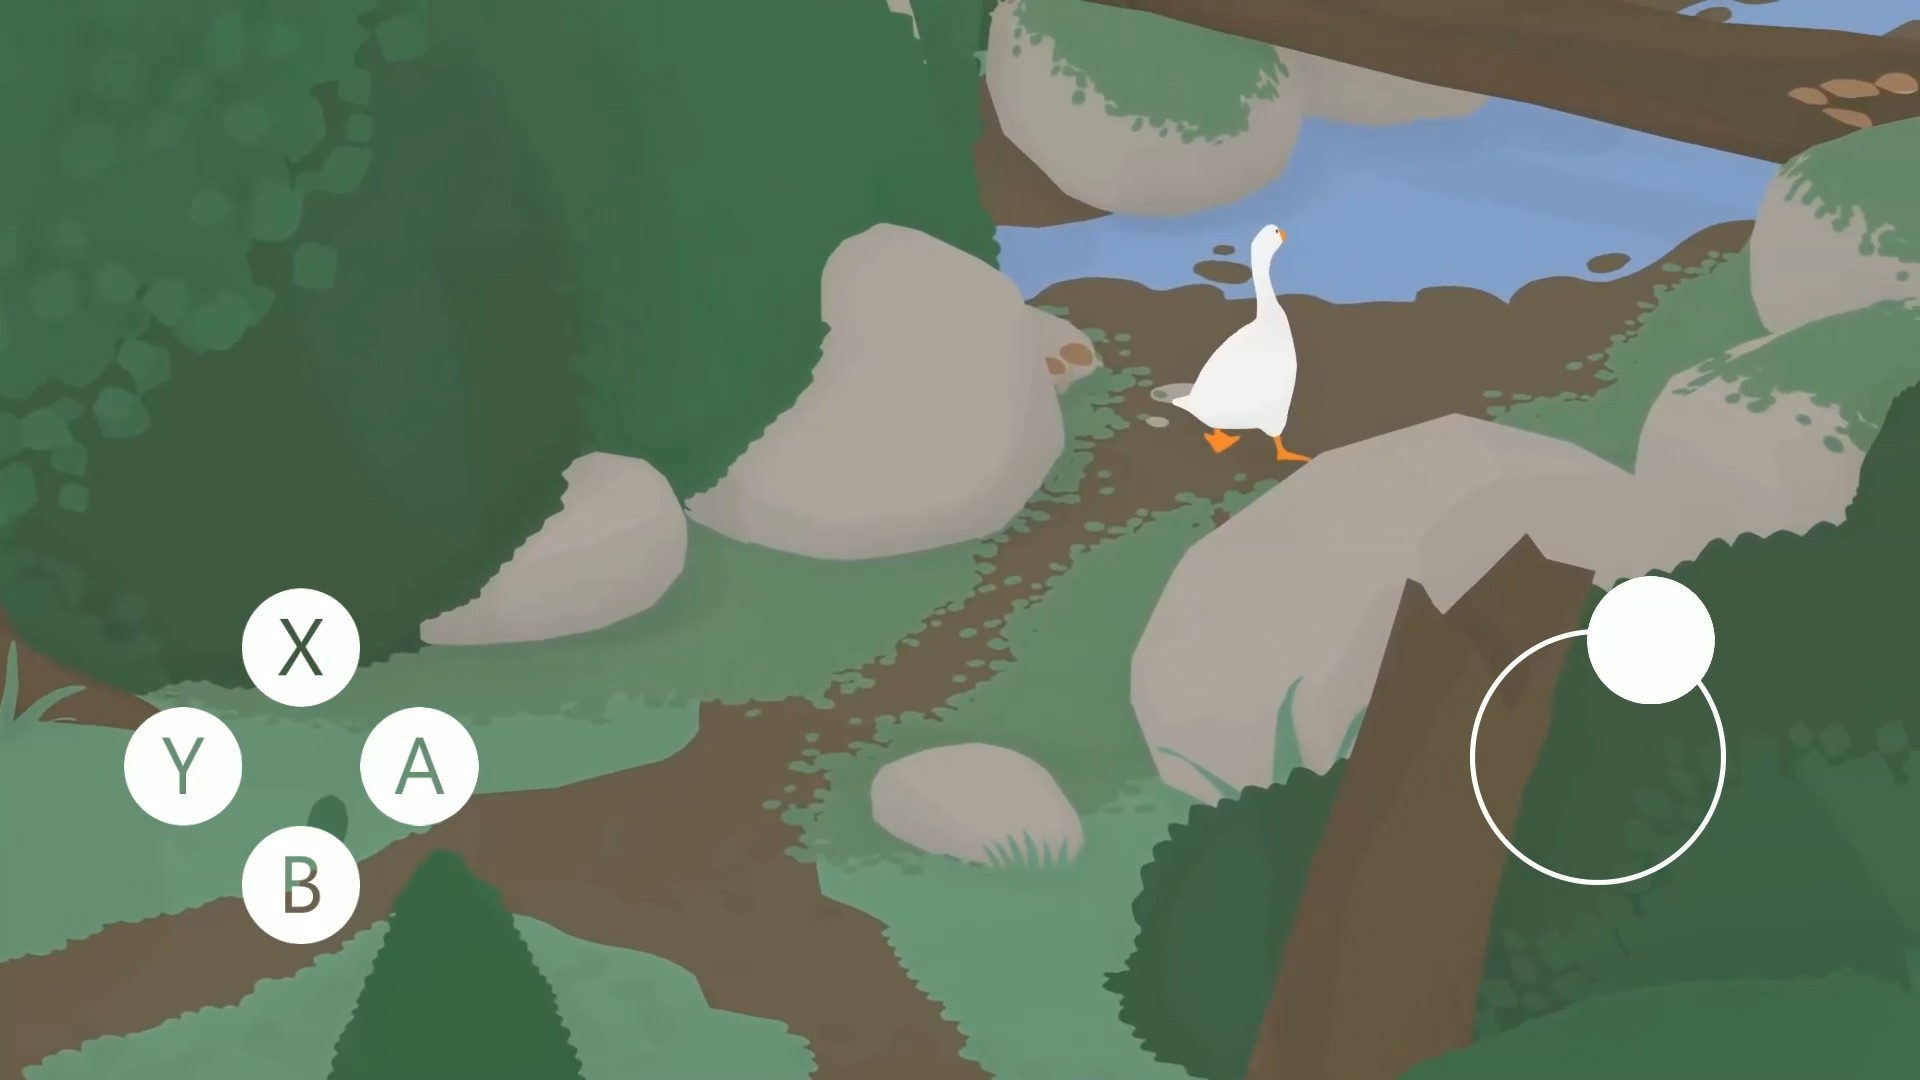 Guide For Untitled Goose Game 2020 🦆 APK for Android Download